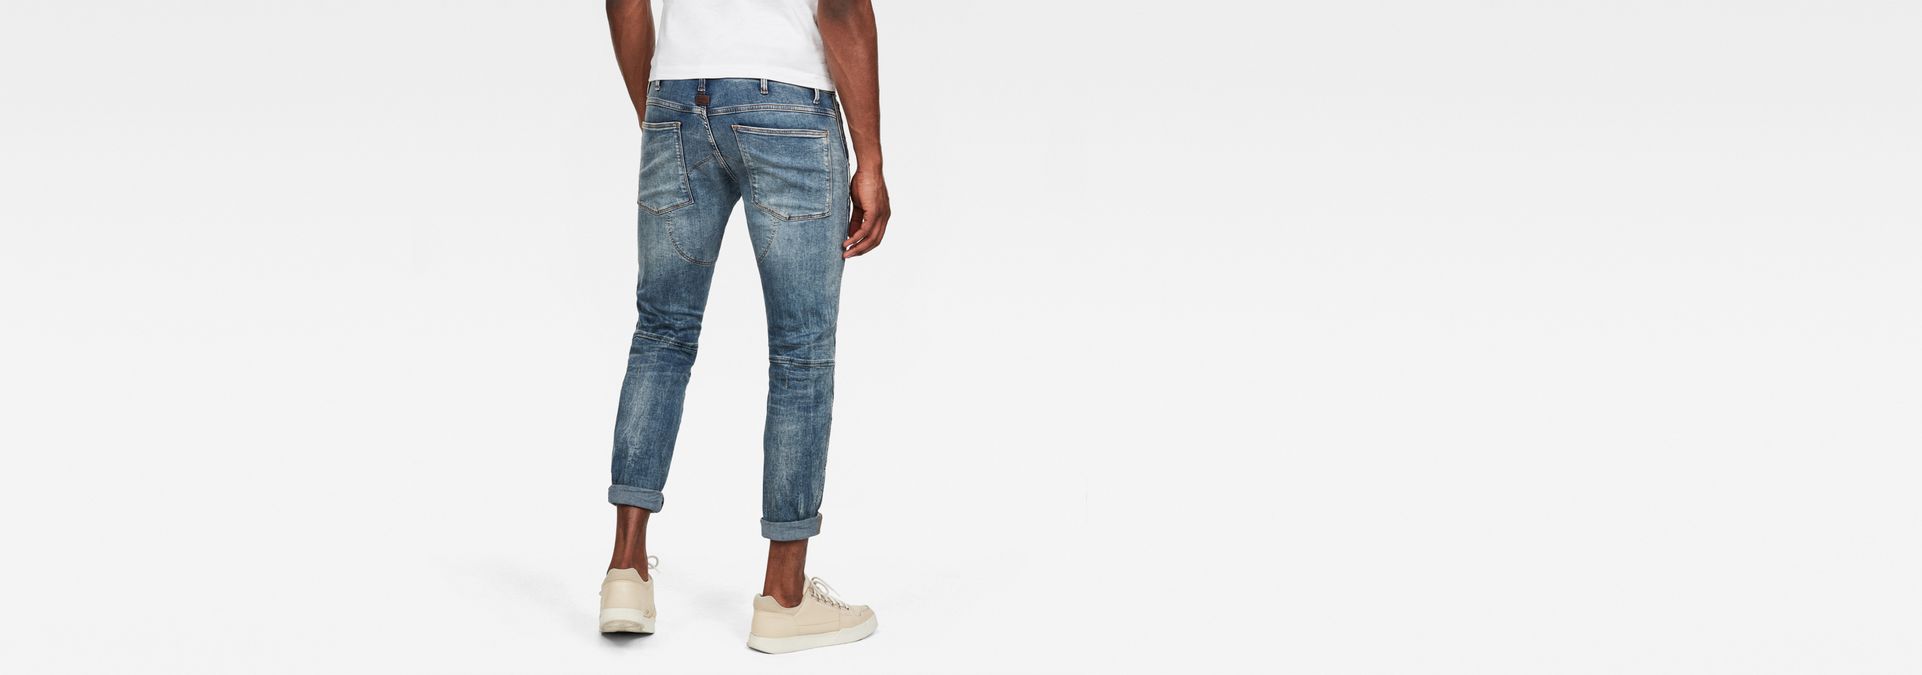 usc g star jeans